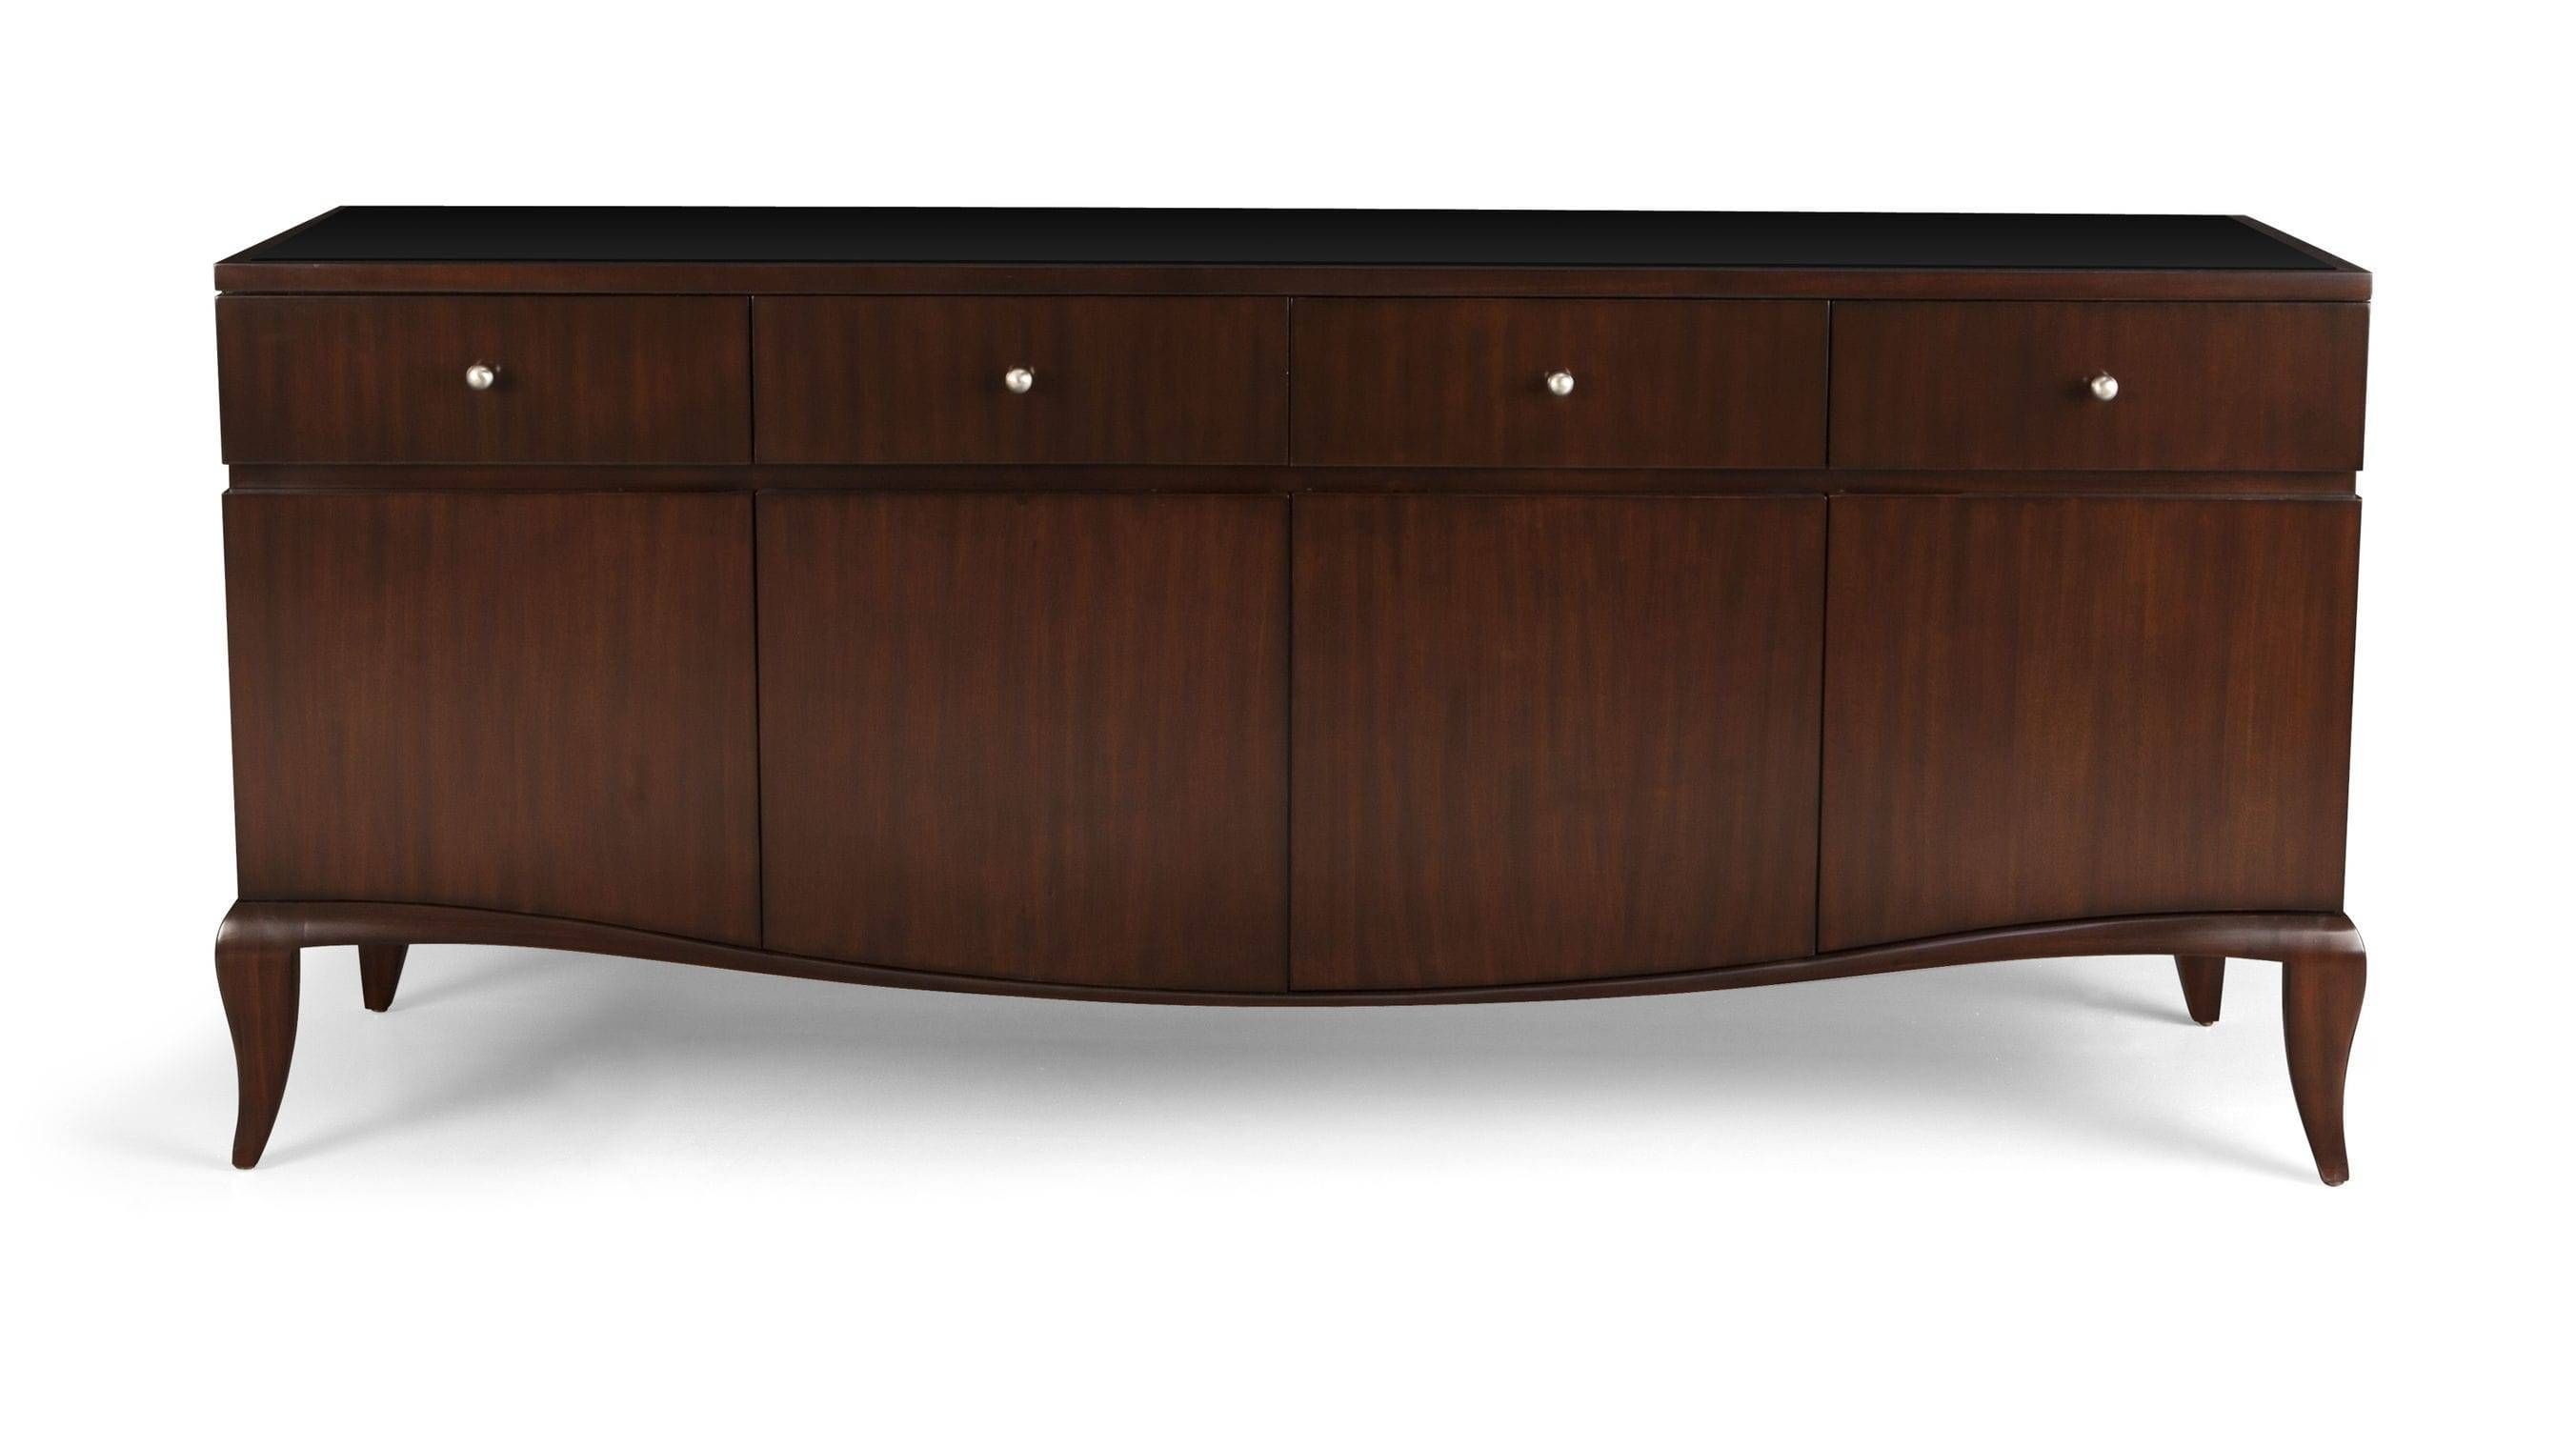 Traditional Sideboard / Wooden – 85 0038 – Christopher Guy Pertaining To Traditional Sideboard (View 2 of 20)